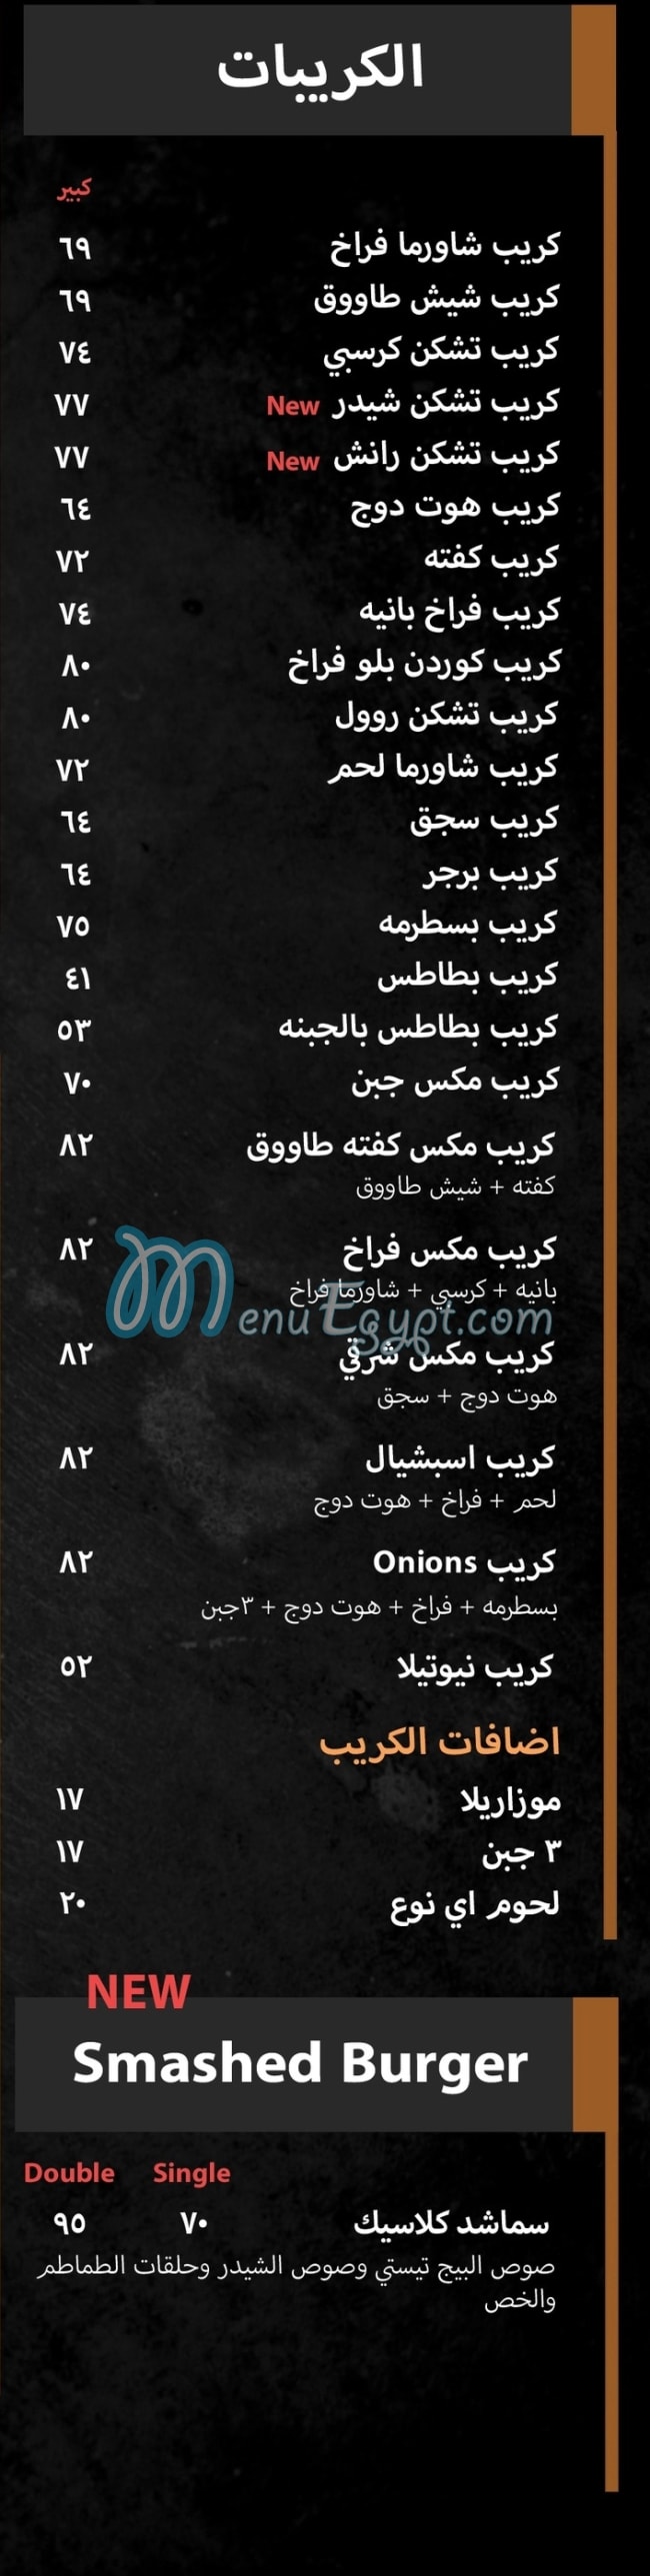 Onions delivery menu